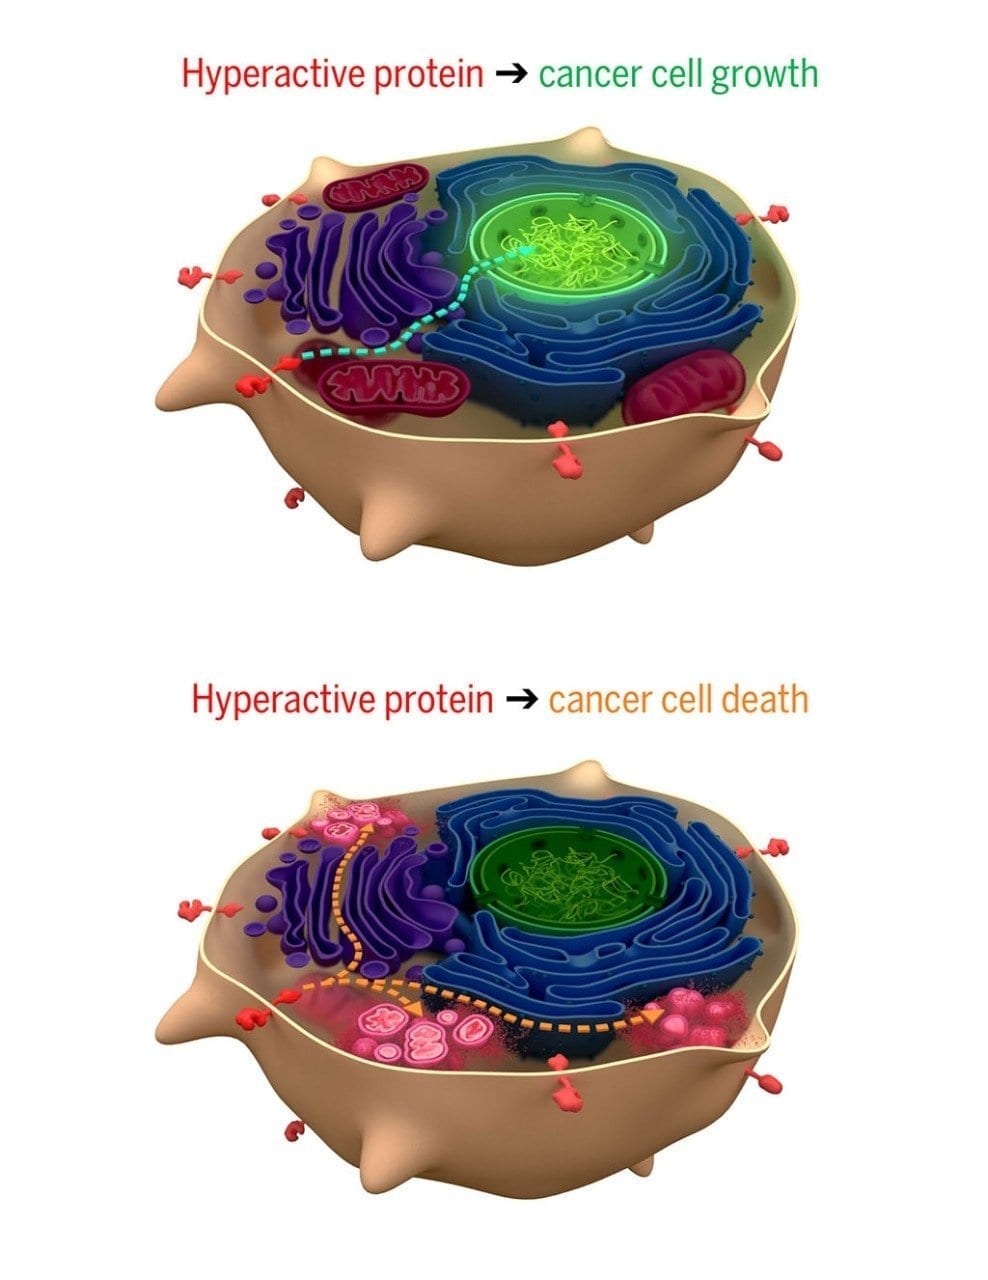 Synthetic proteins can kill cancer cells while sparing their healthy peers